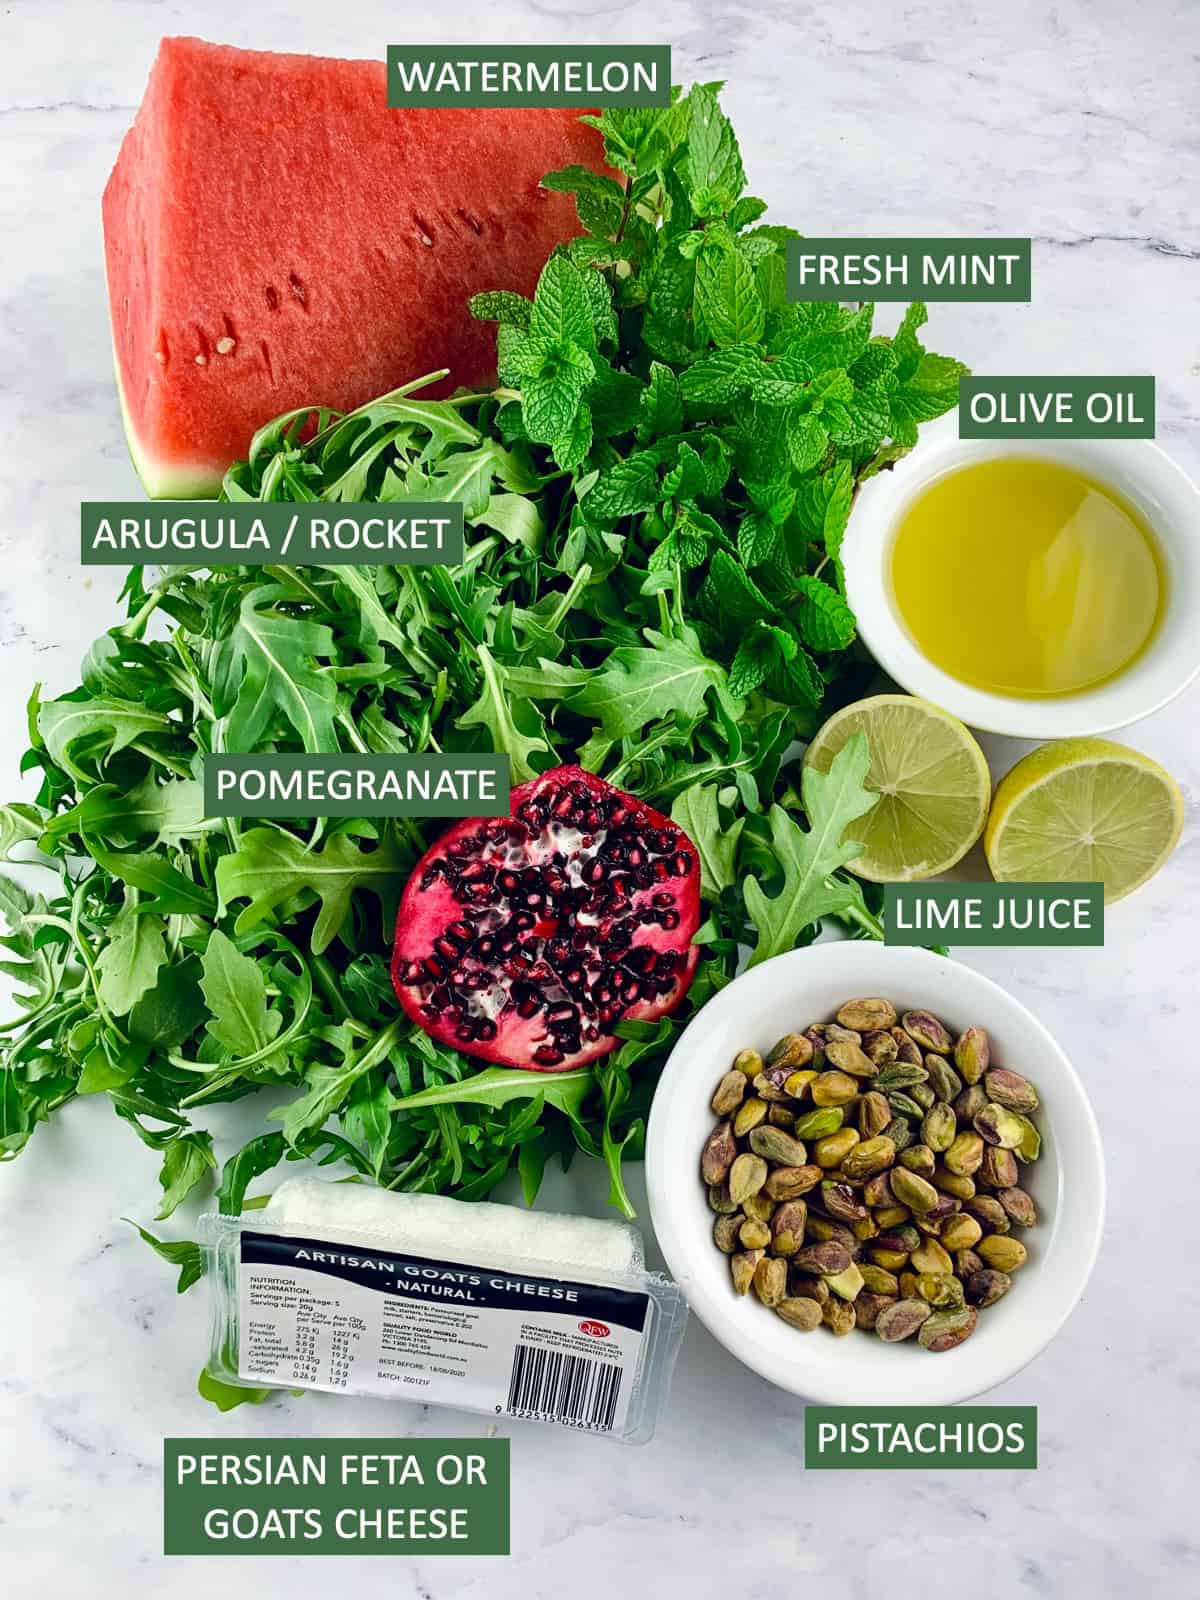 Labelled ingredients needed to make a watermelon feta salad.